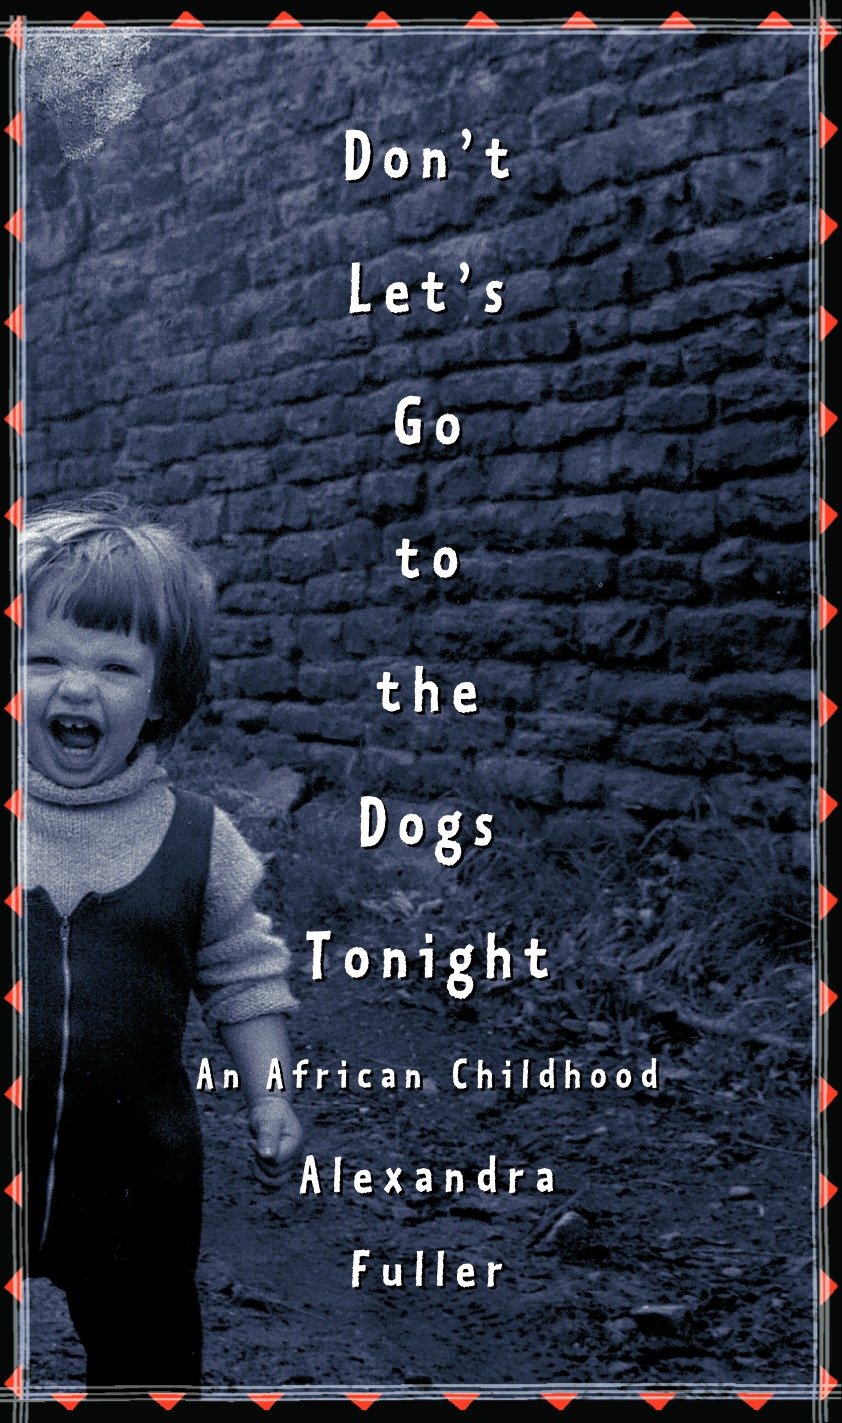 Don't let's go to the dogs tonight an African childhood cover image